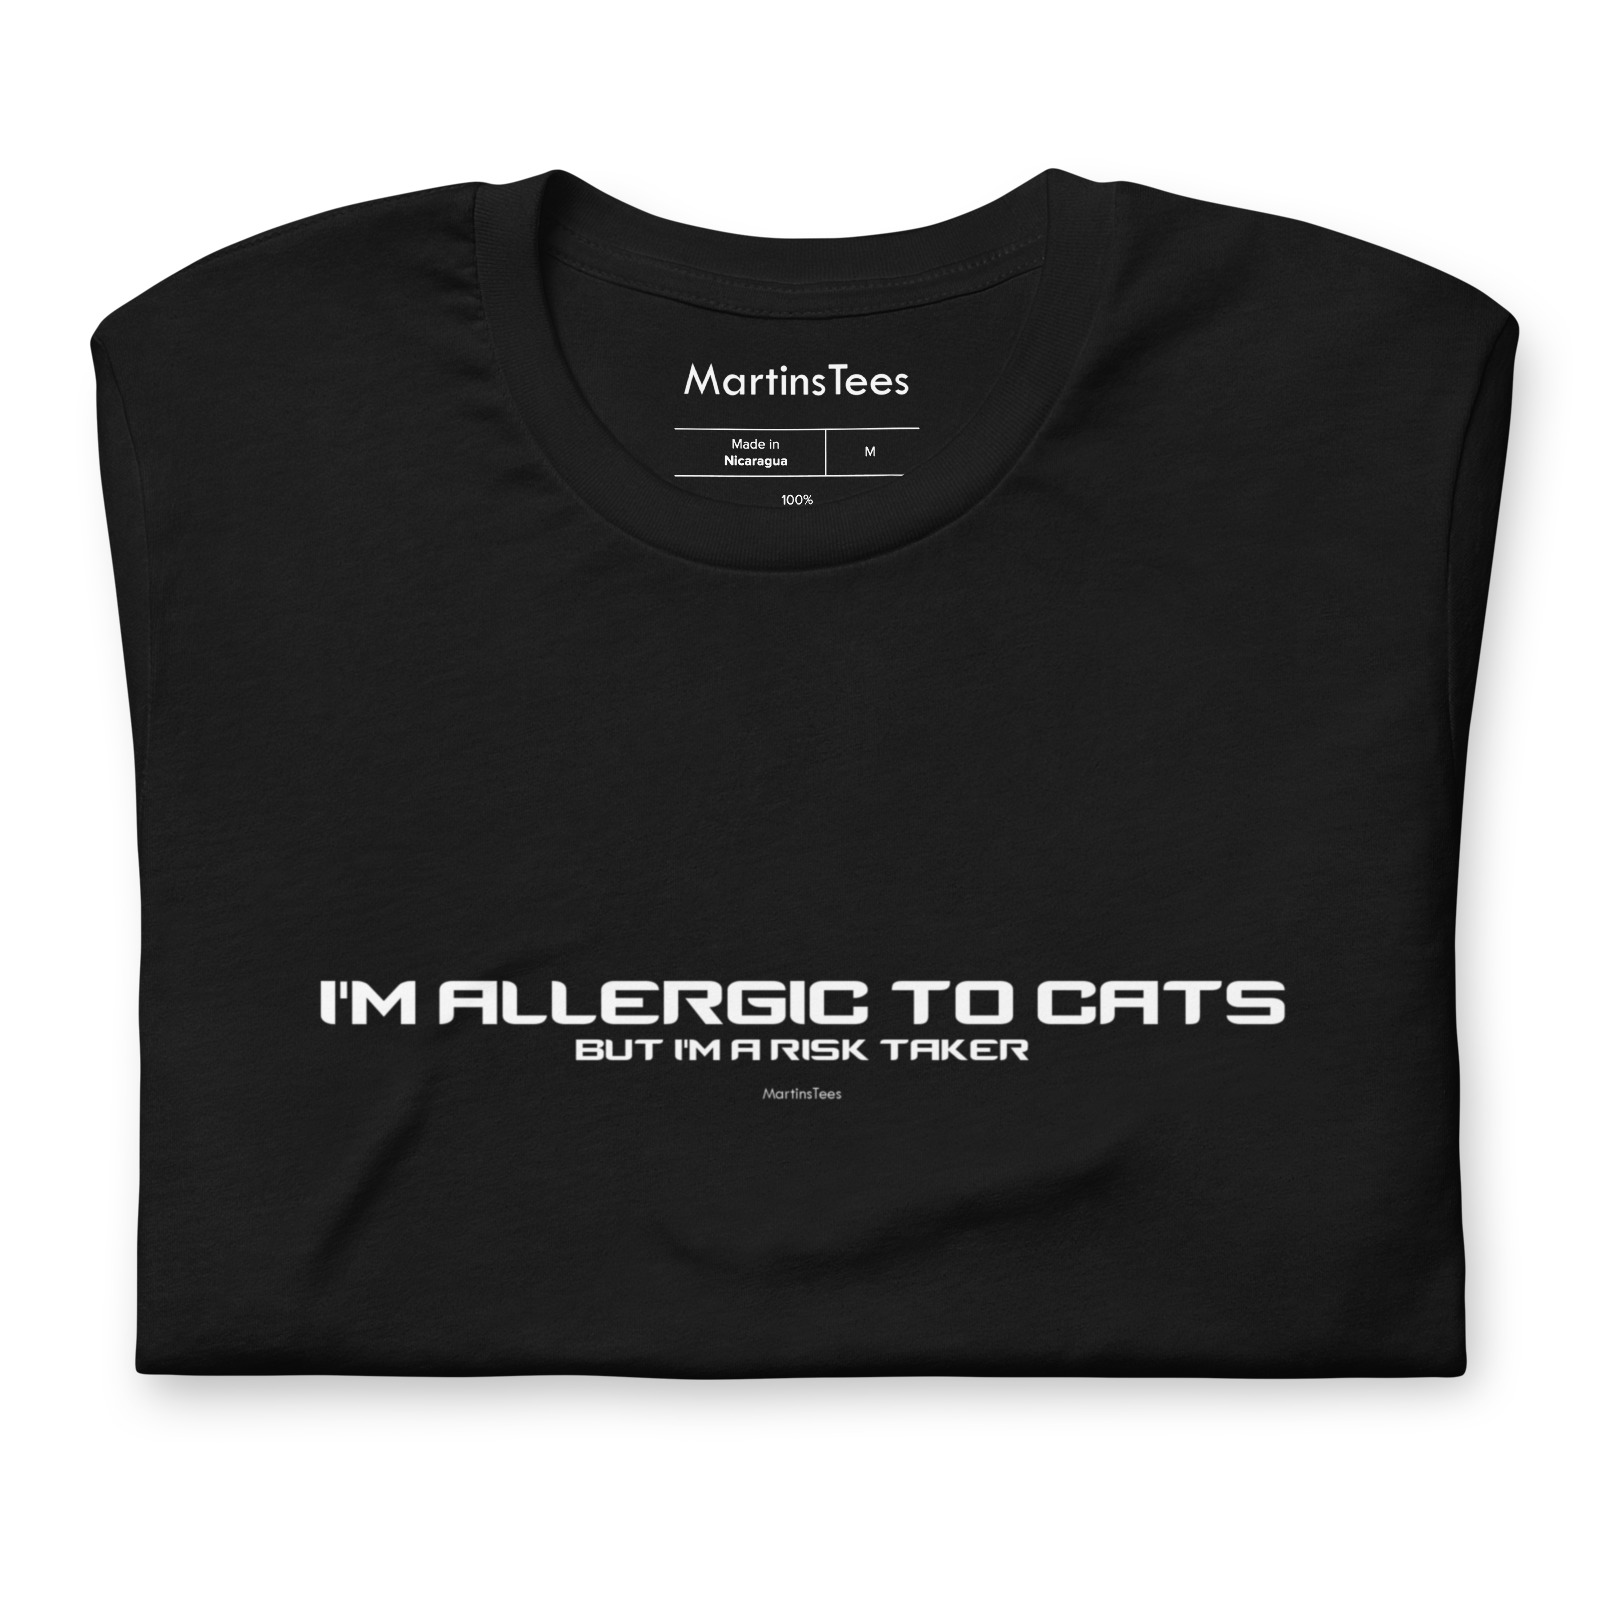 T-shirt: I'M ALLERGIC TO CATS - BUT I'M A RISK TAKER